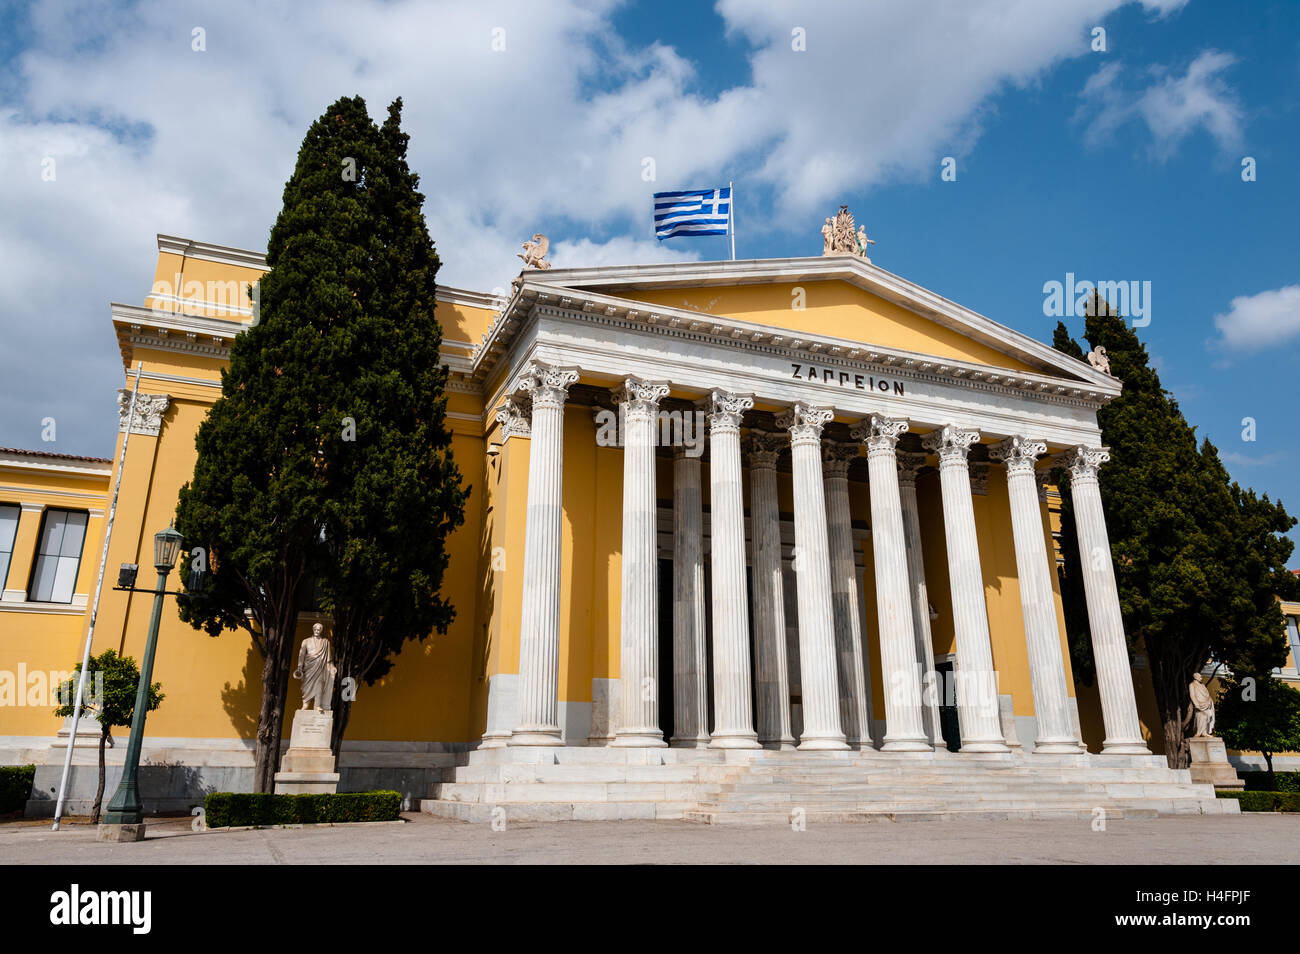 Athens, Greece. The Zappeion is a building in the National Gardens. Stock Photo